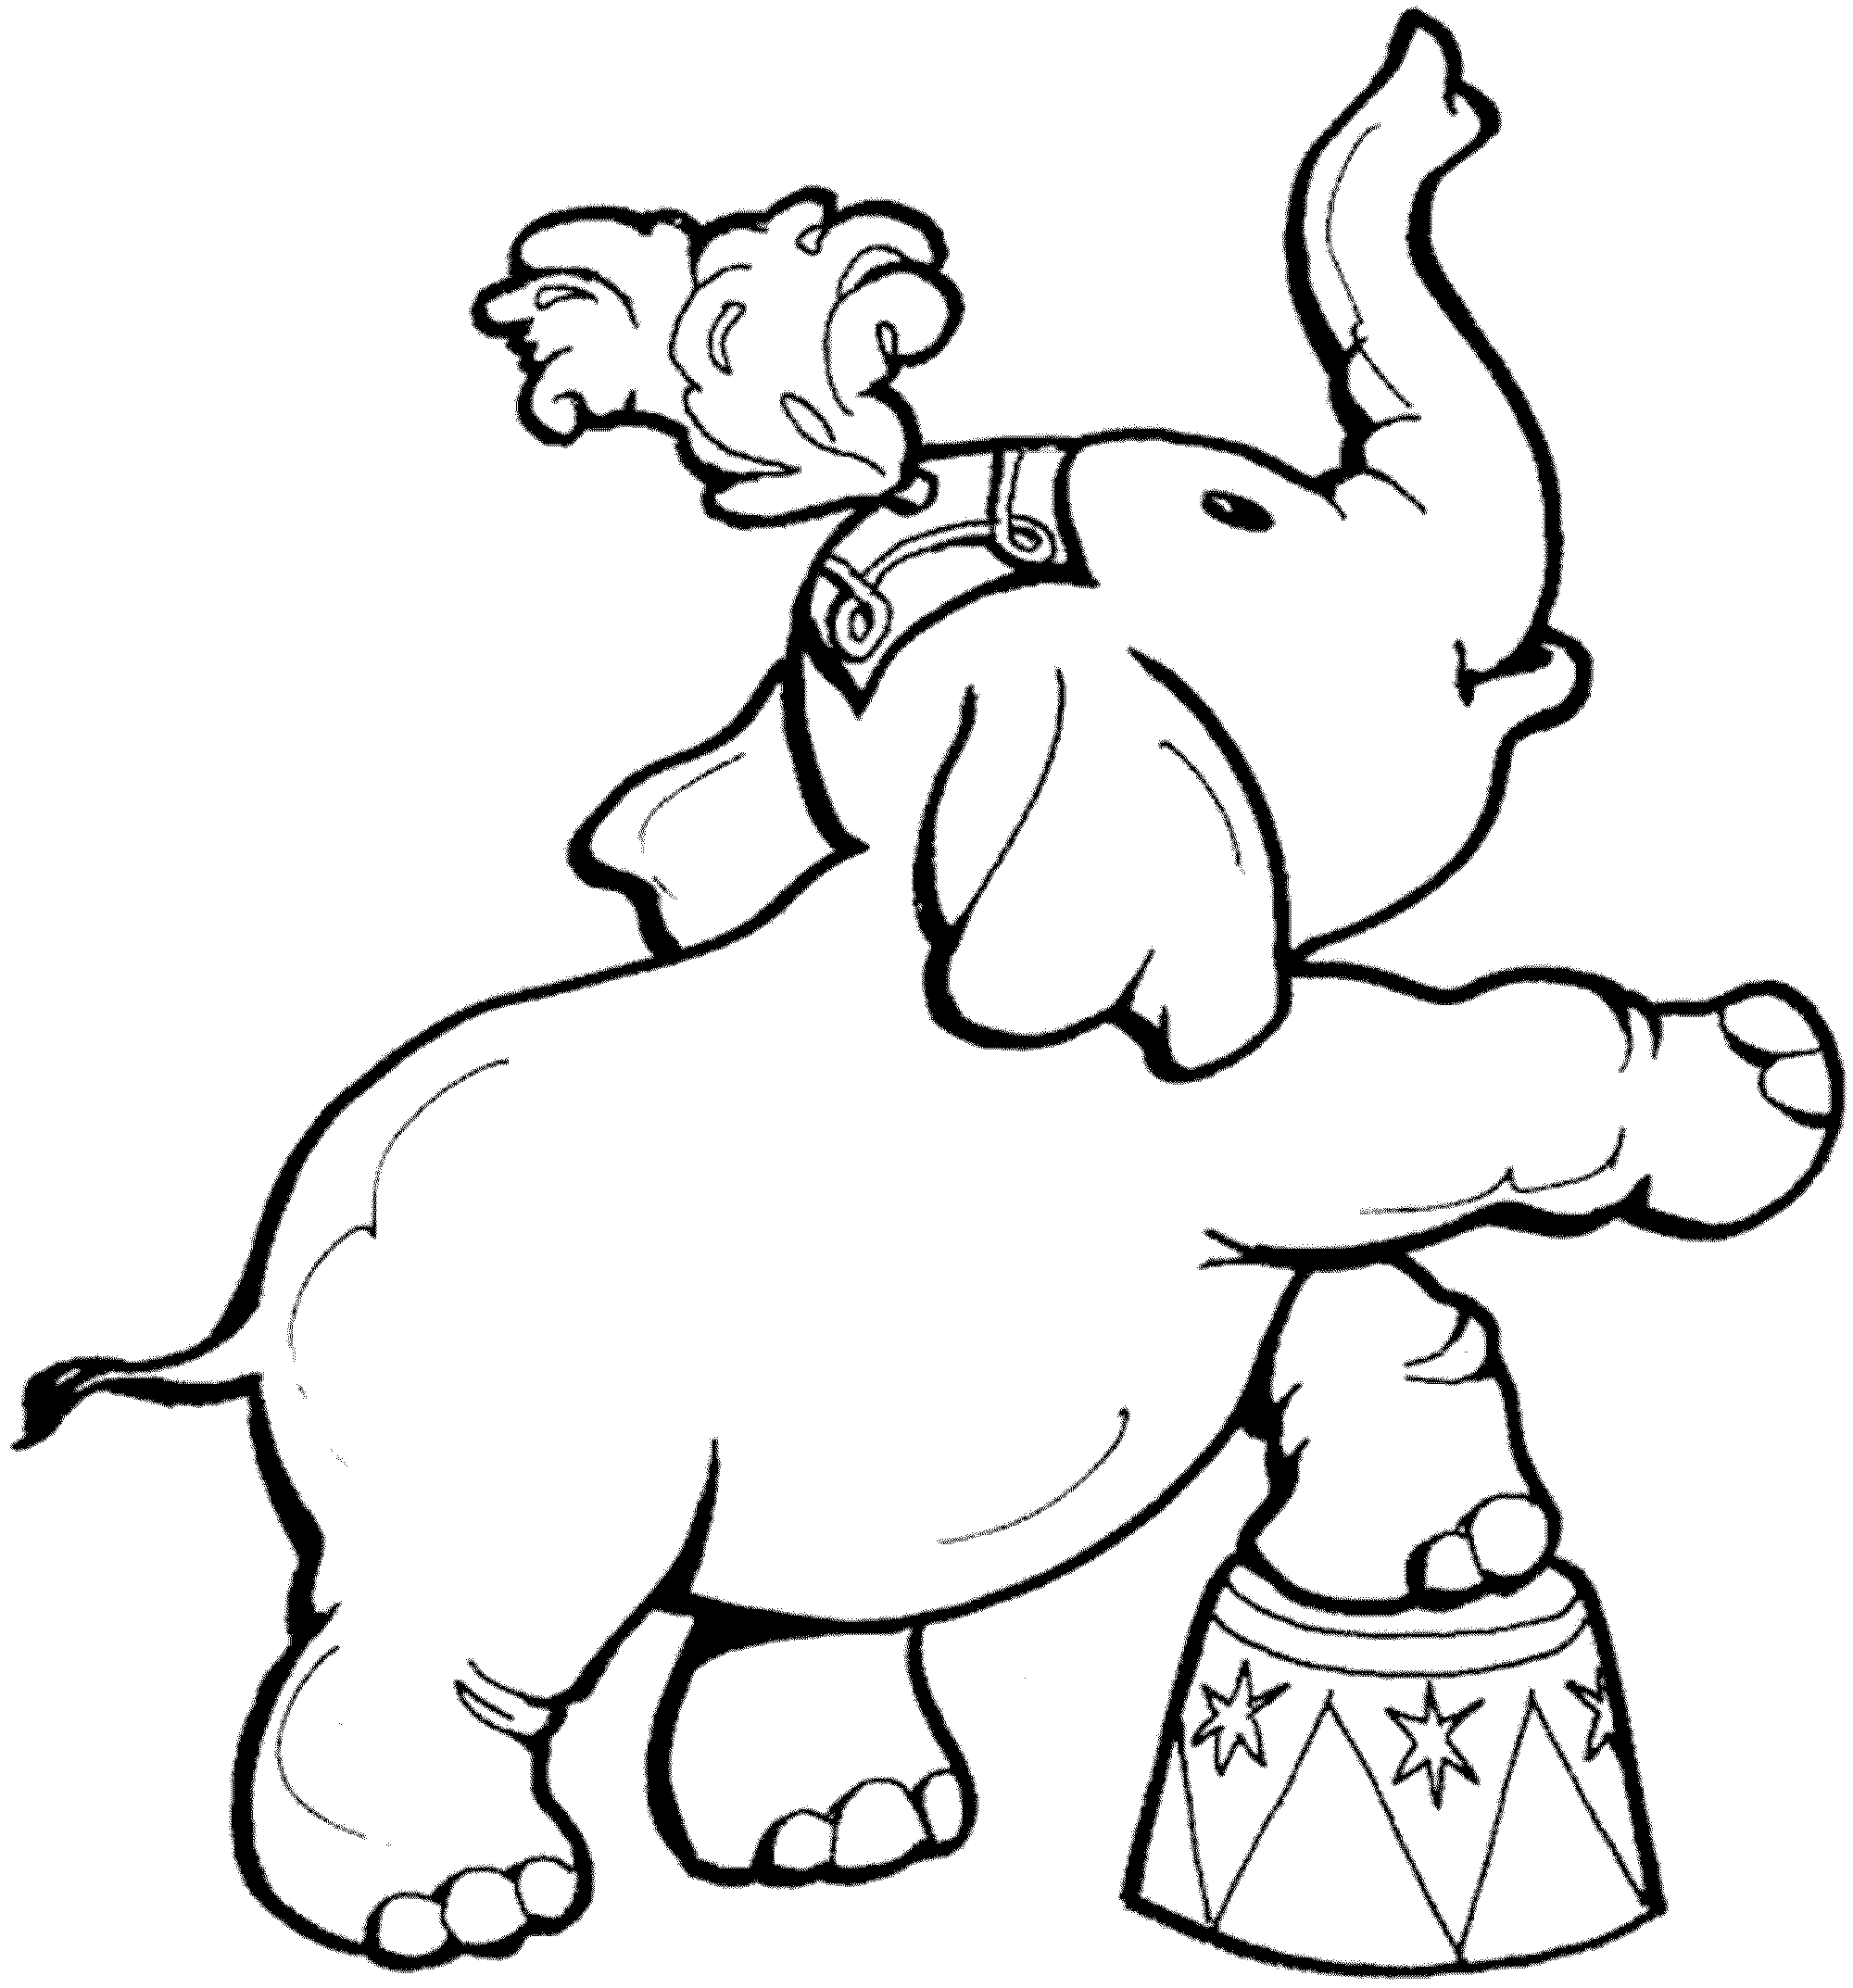 elephant pictures to color baby elephant coloring pages to download and print for free color elephant pictures to 